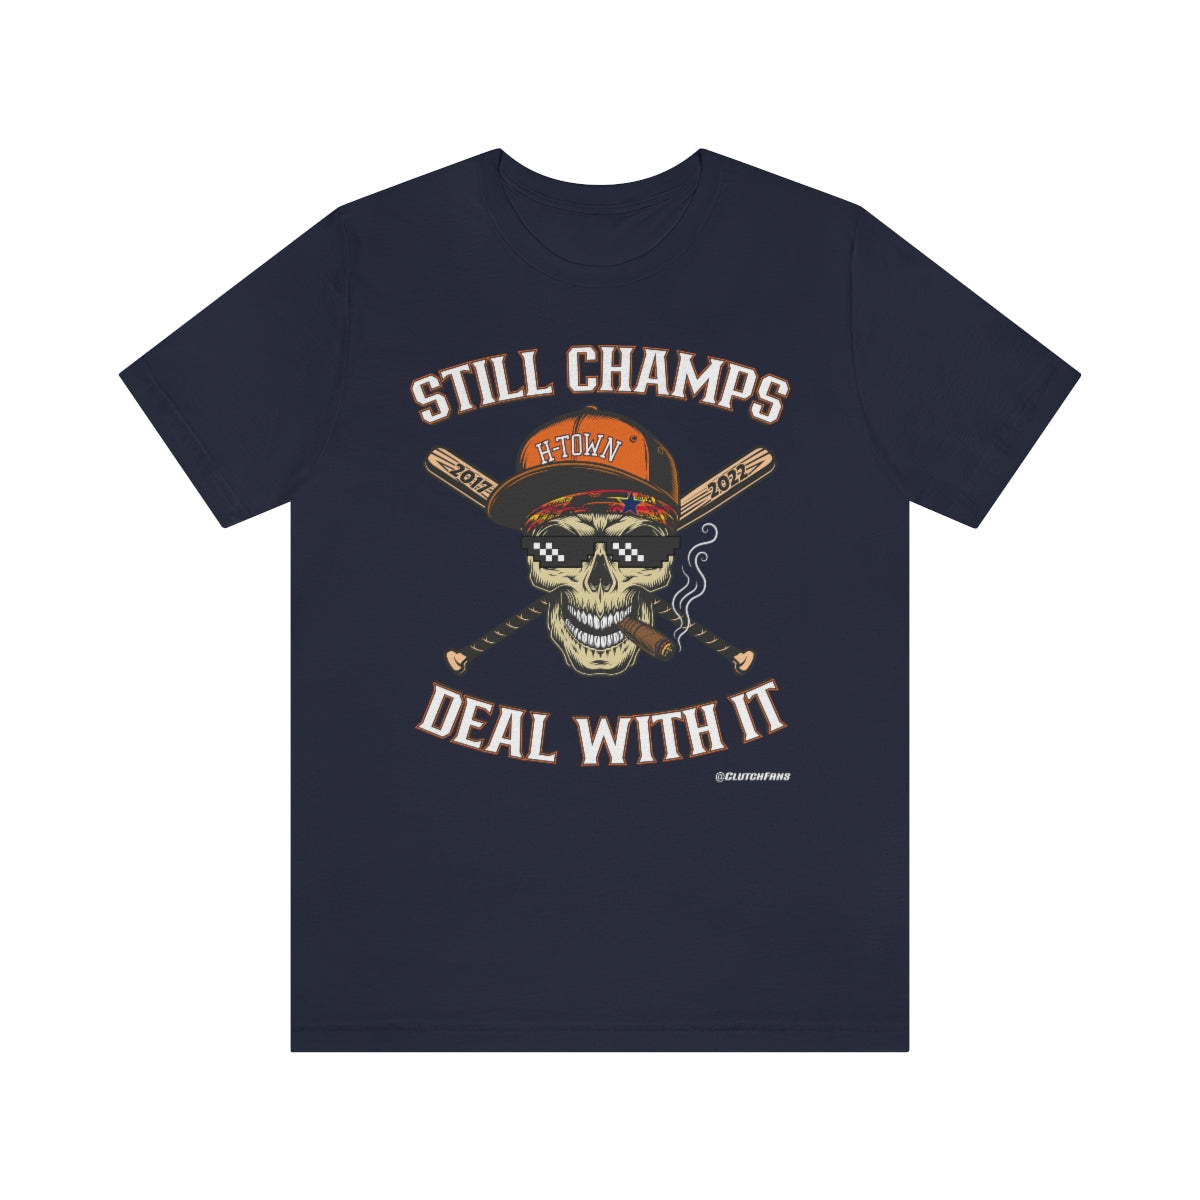 STILL CHAMPS: Deal With It!